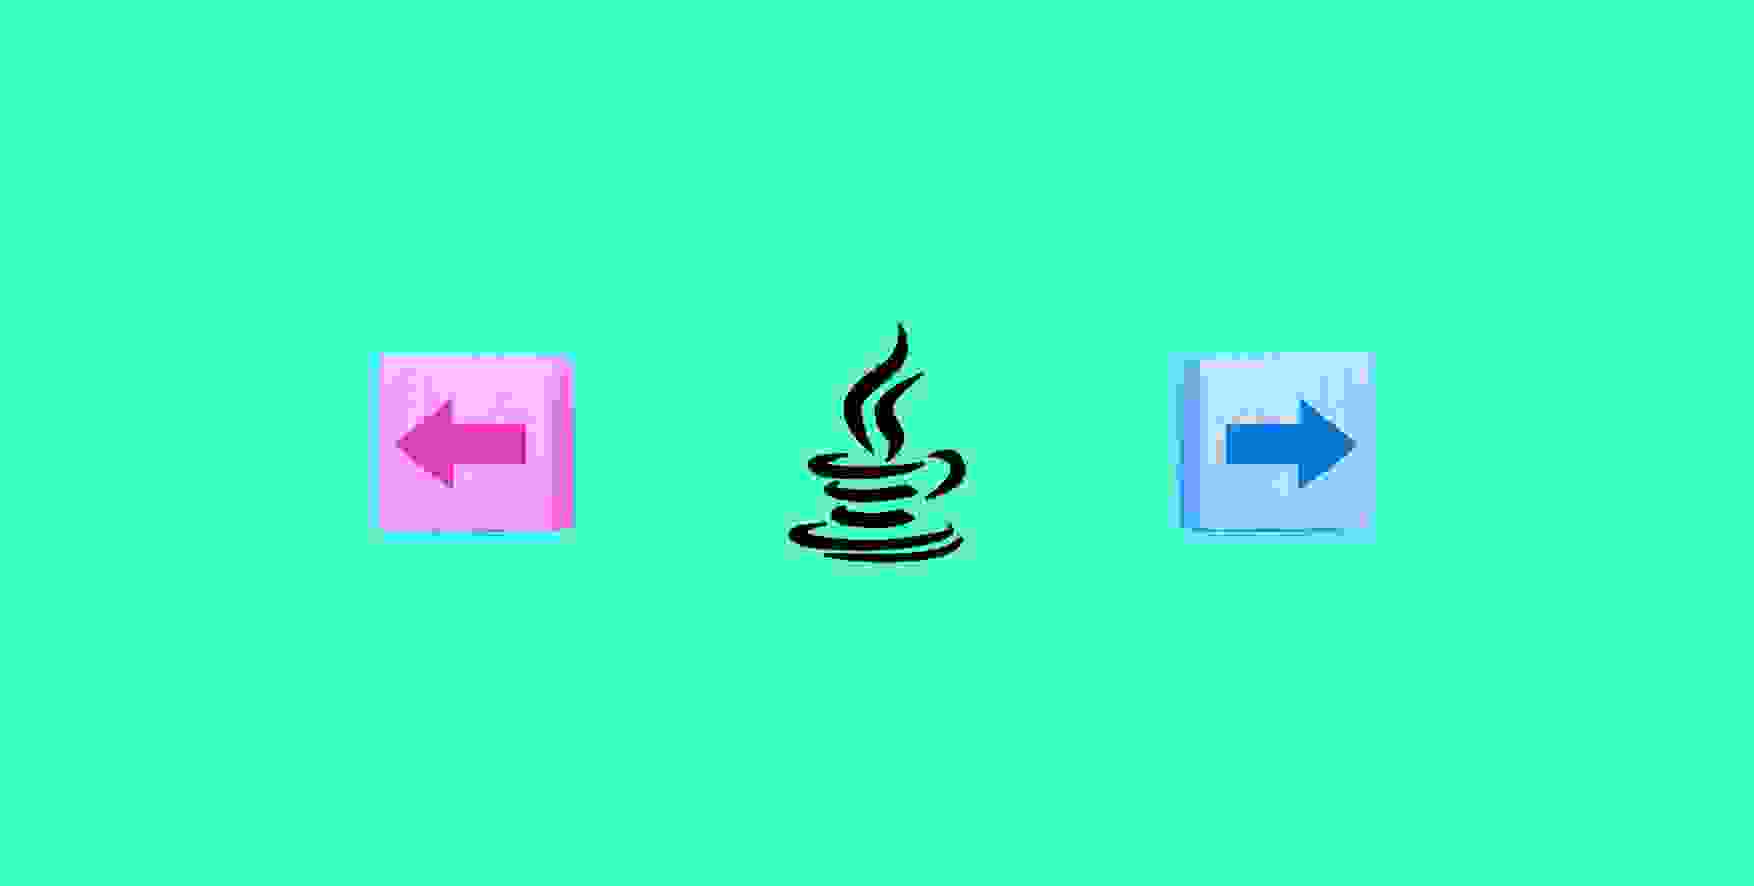 logo of Java and two direction symbols on green background